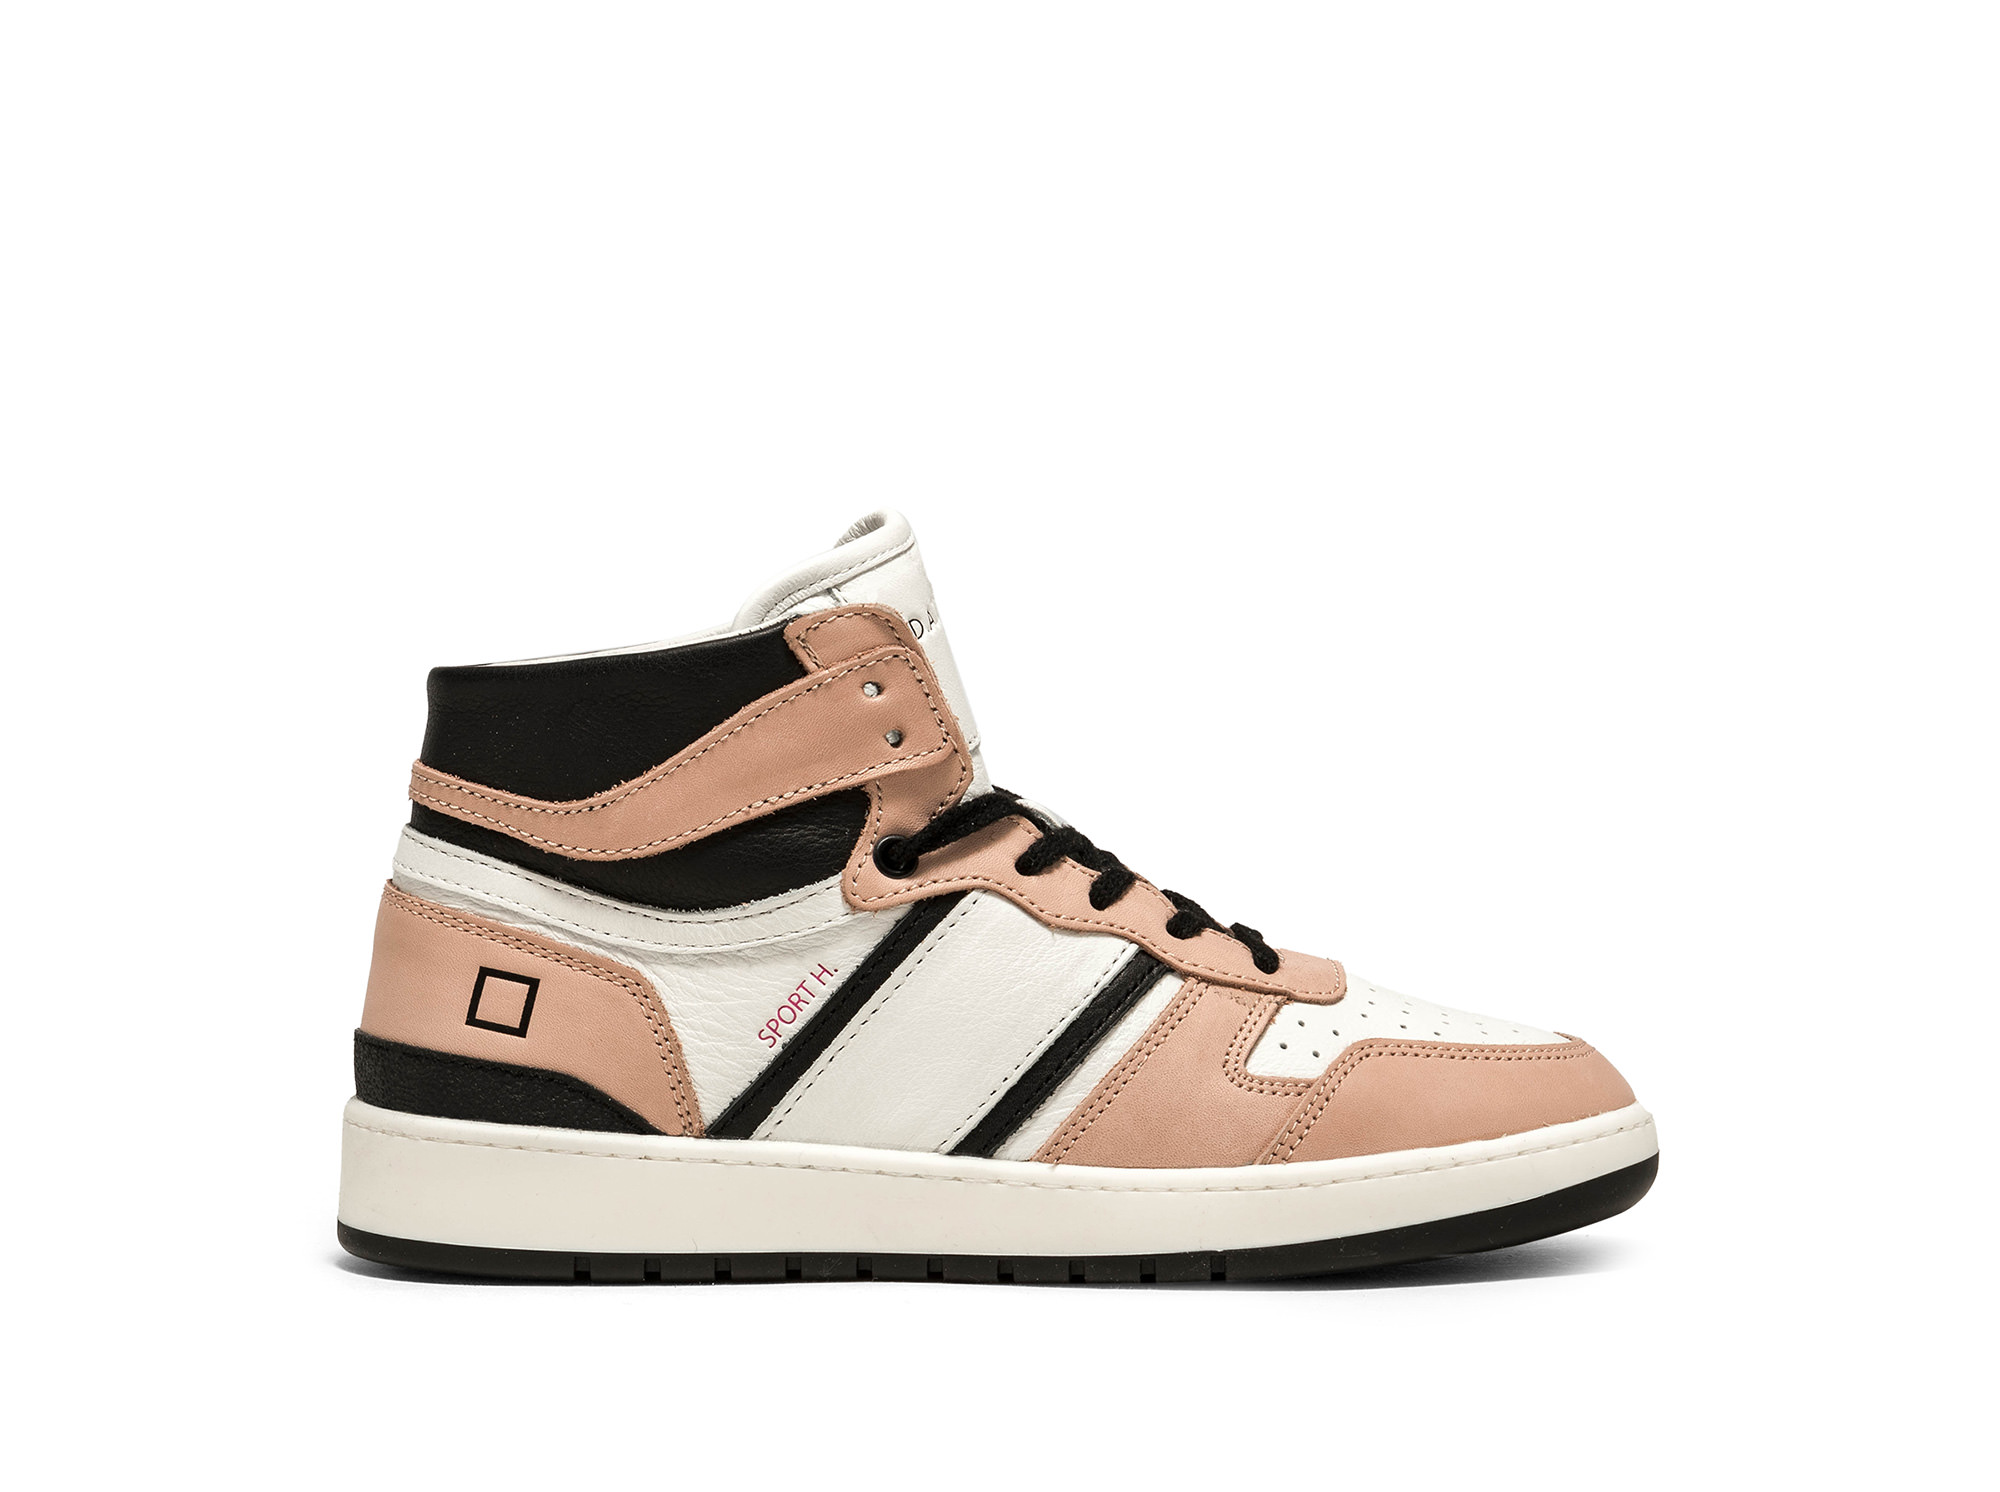 Collection Woman – D.A.T.E. SNEAKERS || T-SQUARE